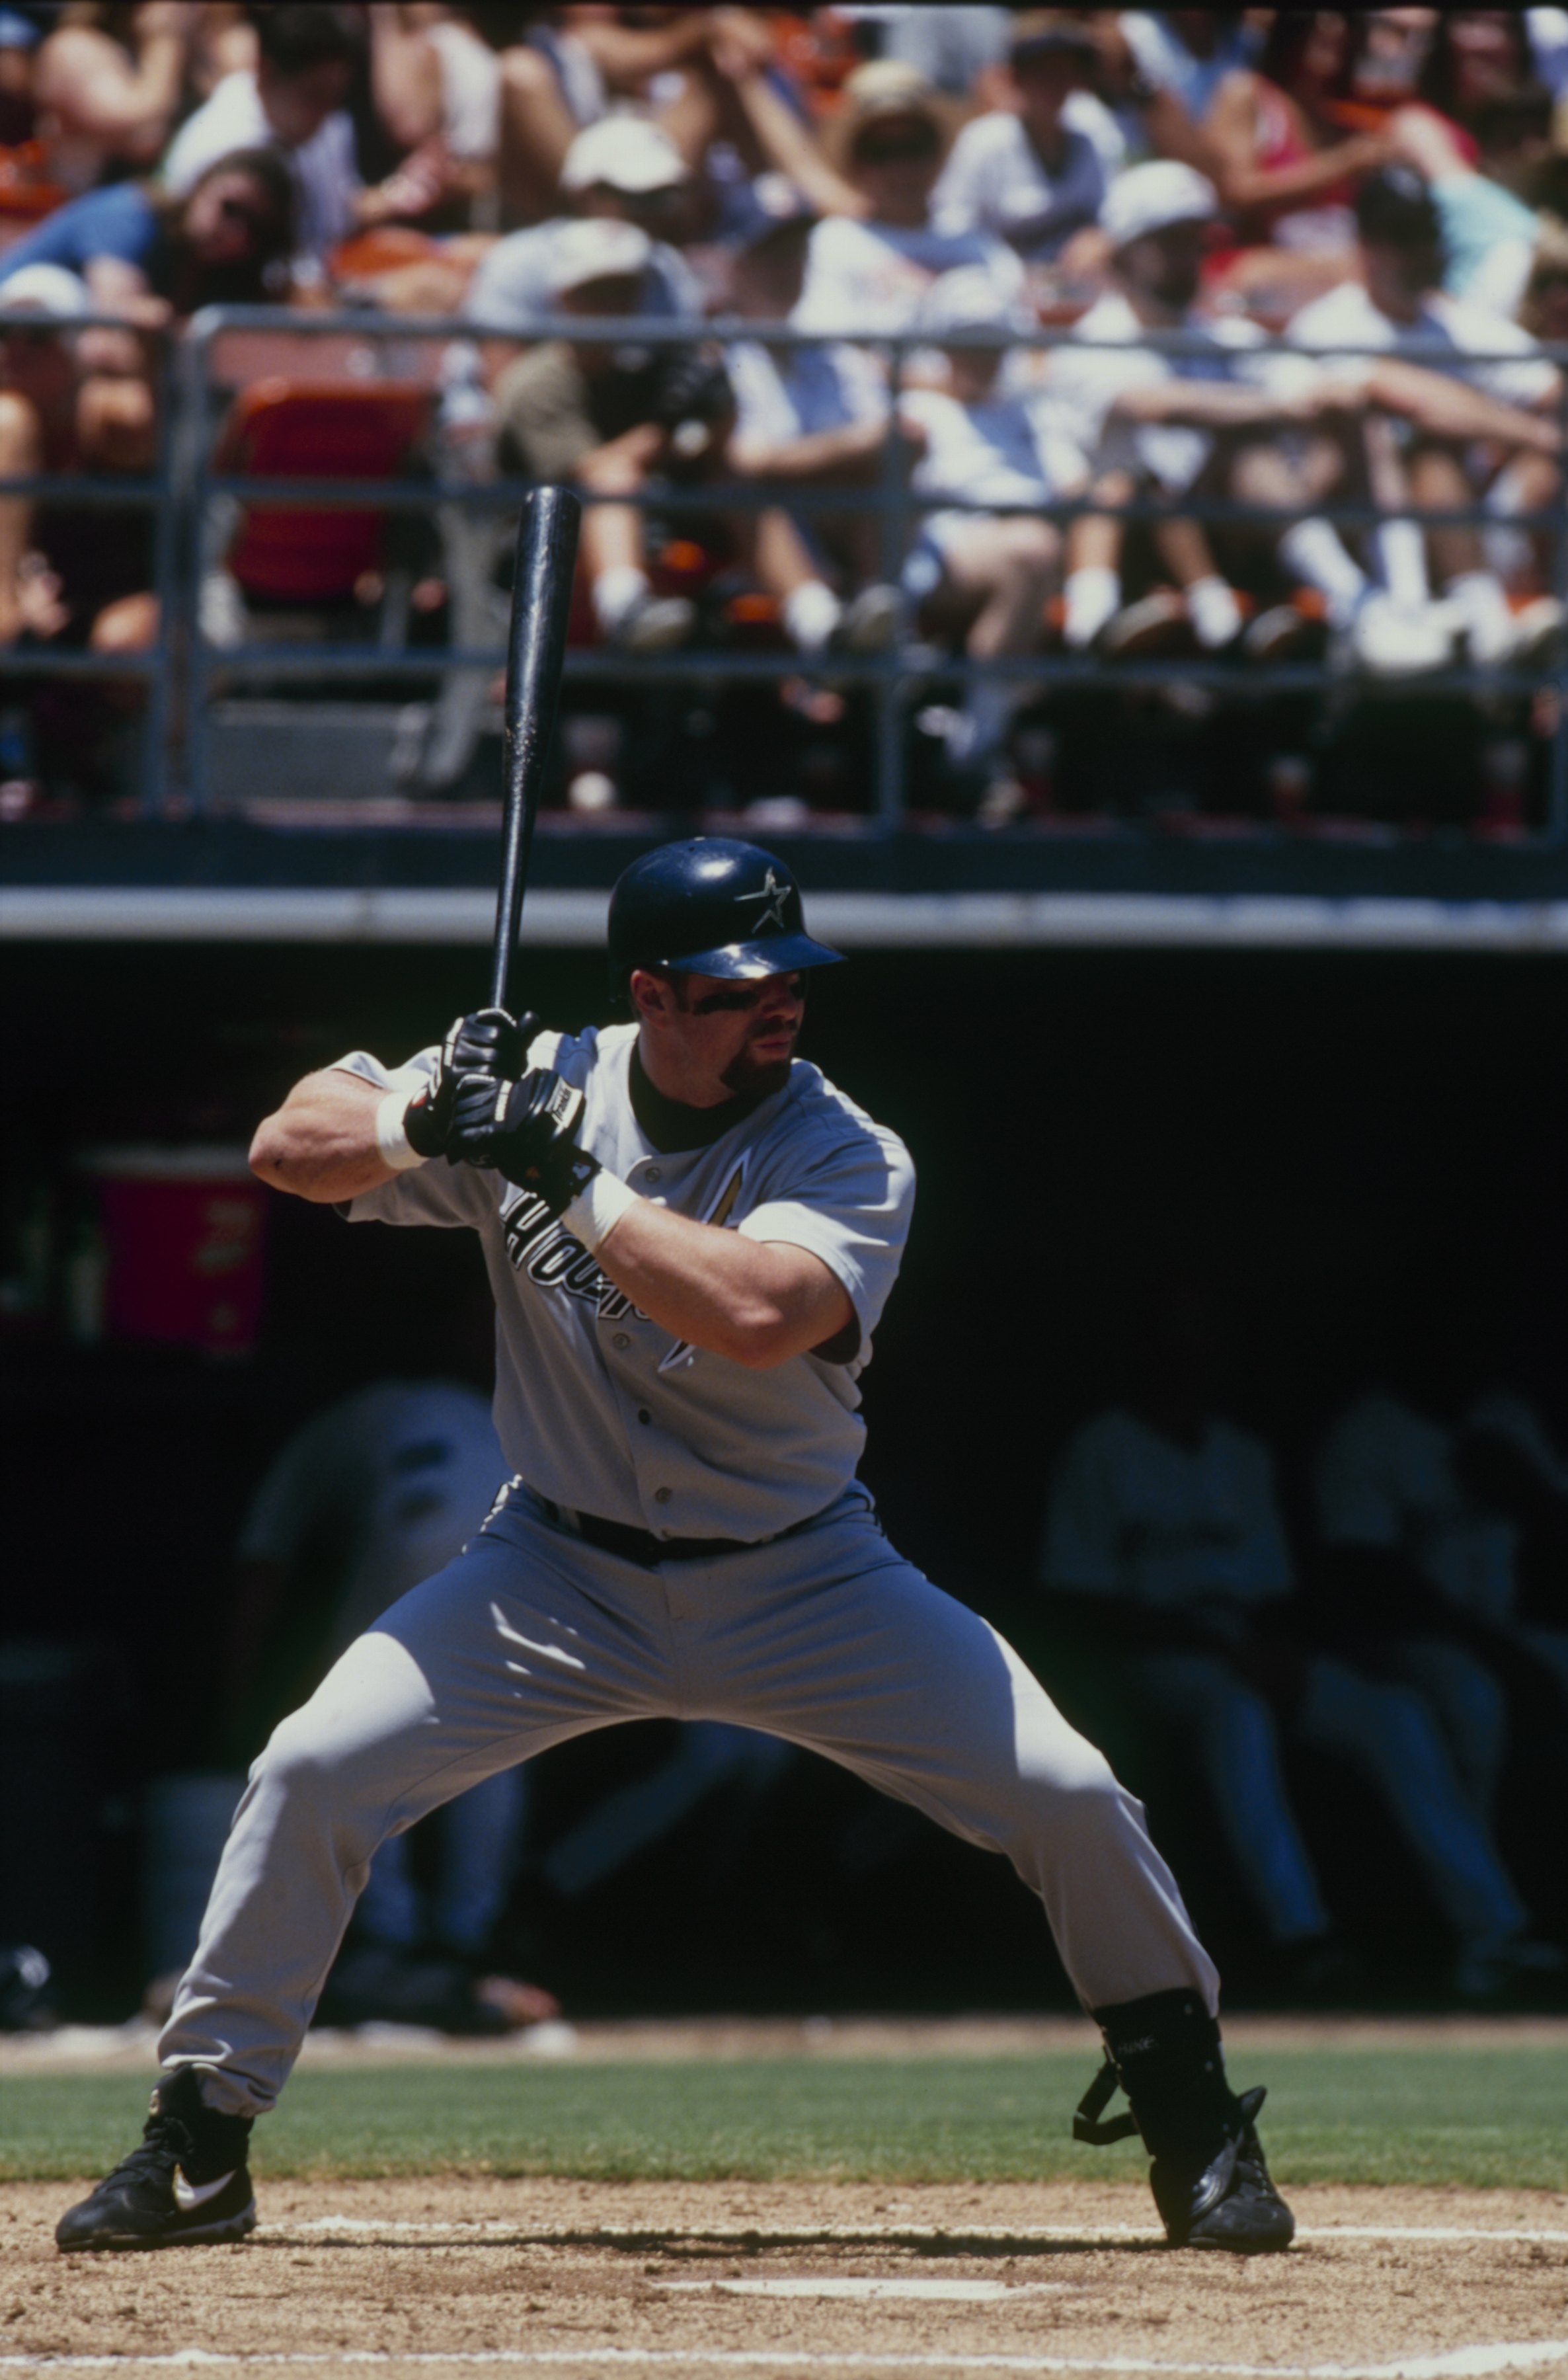 Jeff Bagwell of the Houston Astros stands ready at the plate